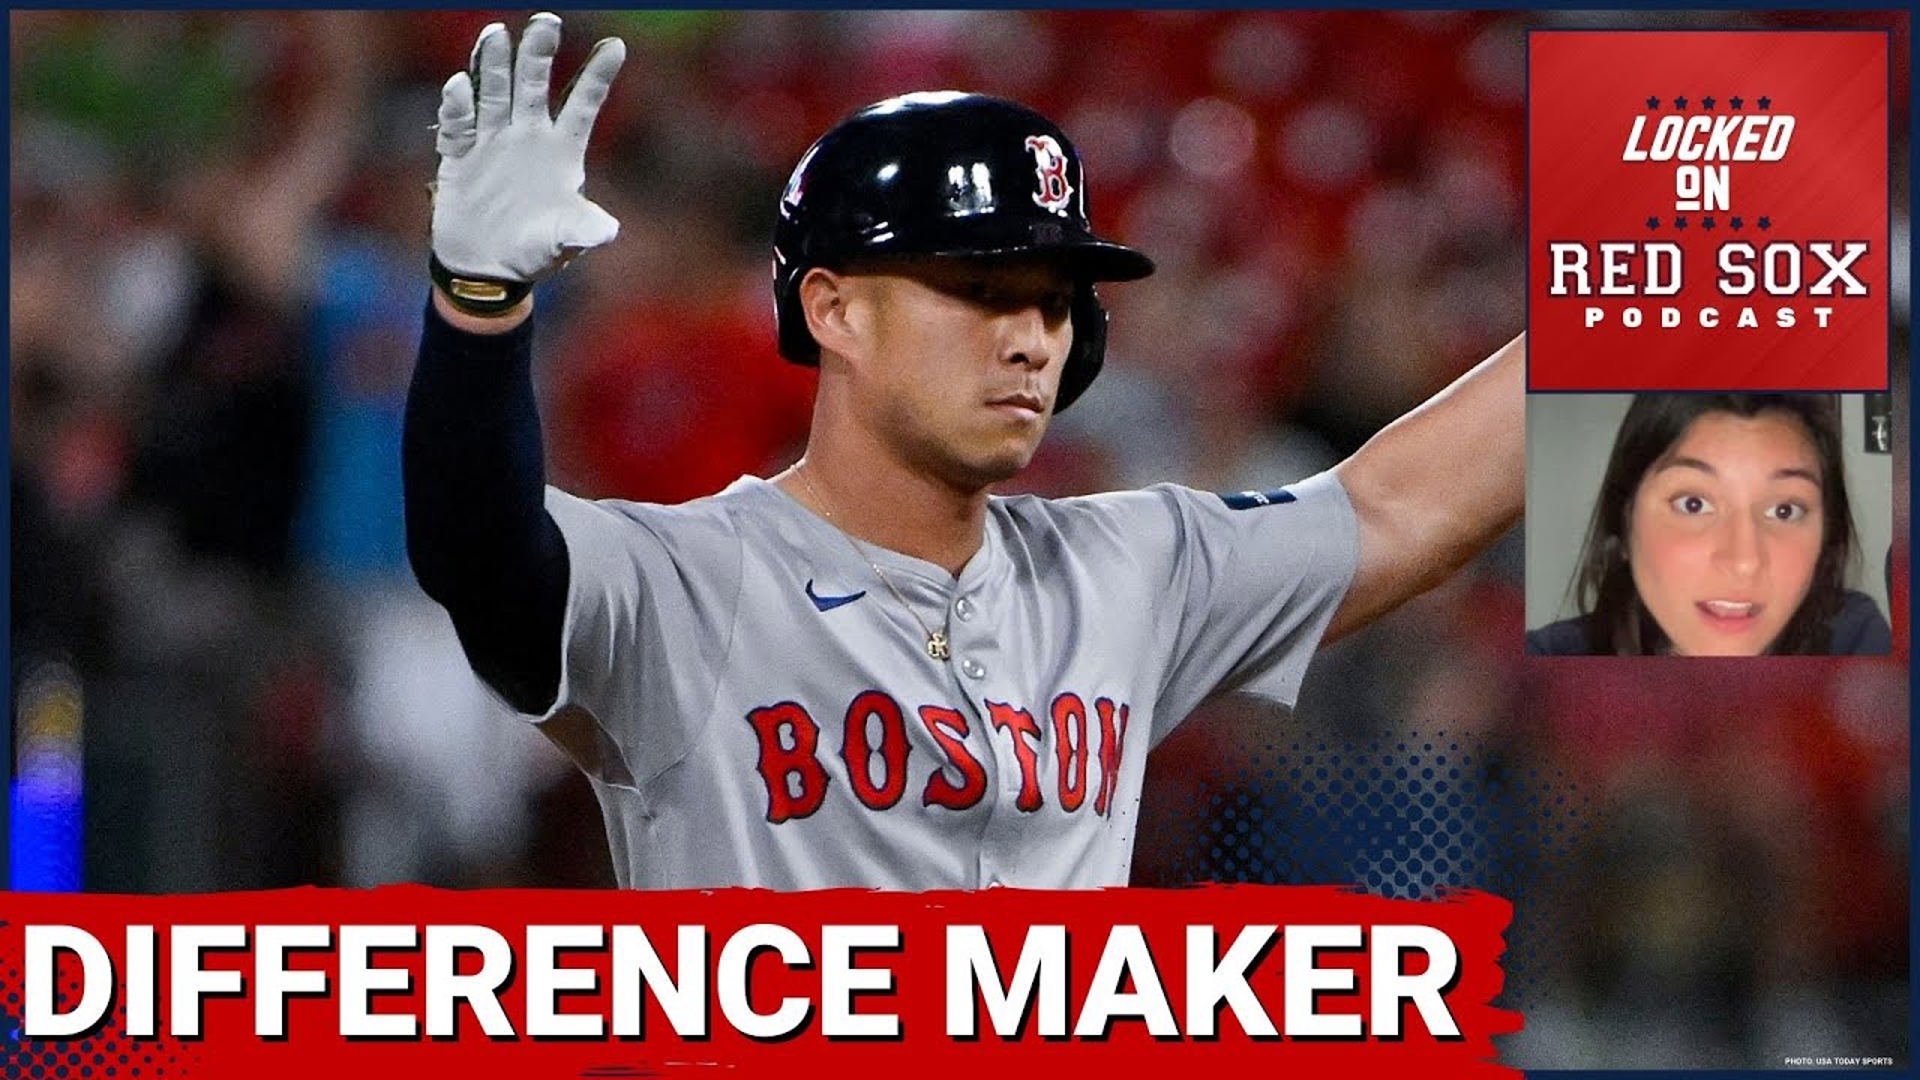 Rob Refsnyder's Contributions to the Boston Red Sox are Very  Underappreciated | Red Sox Podcast